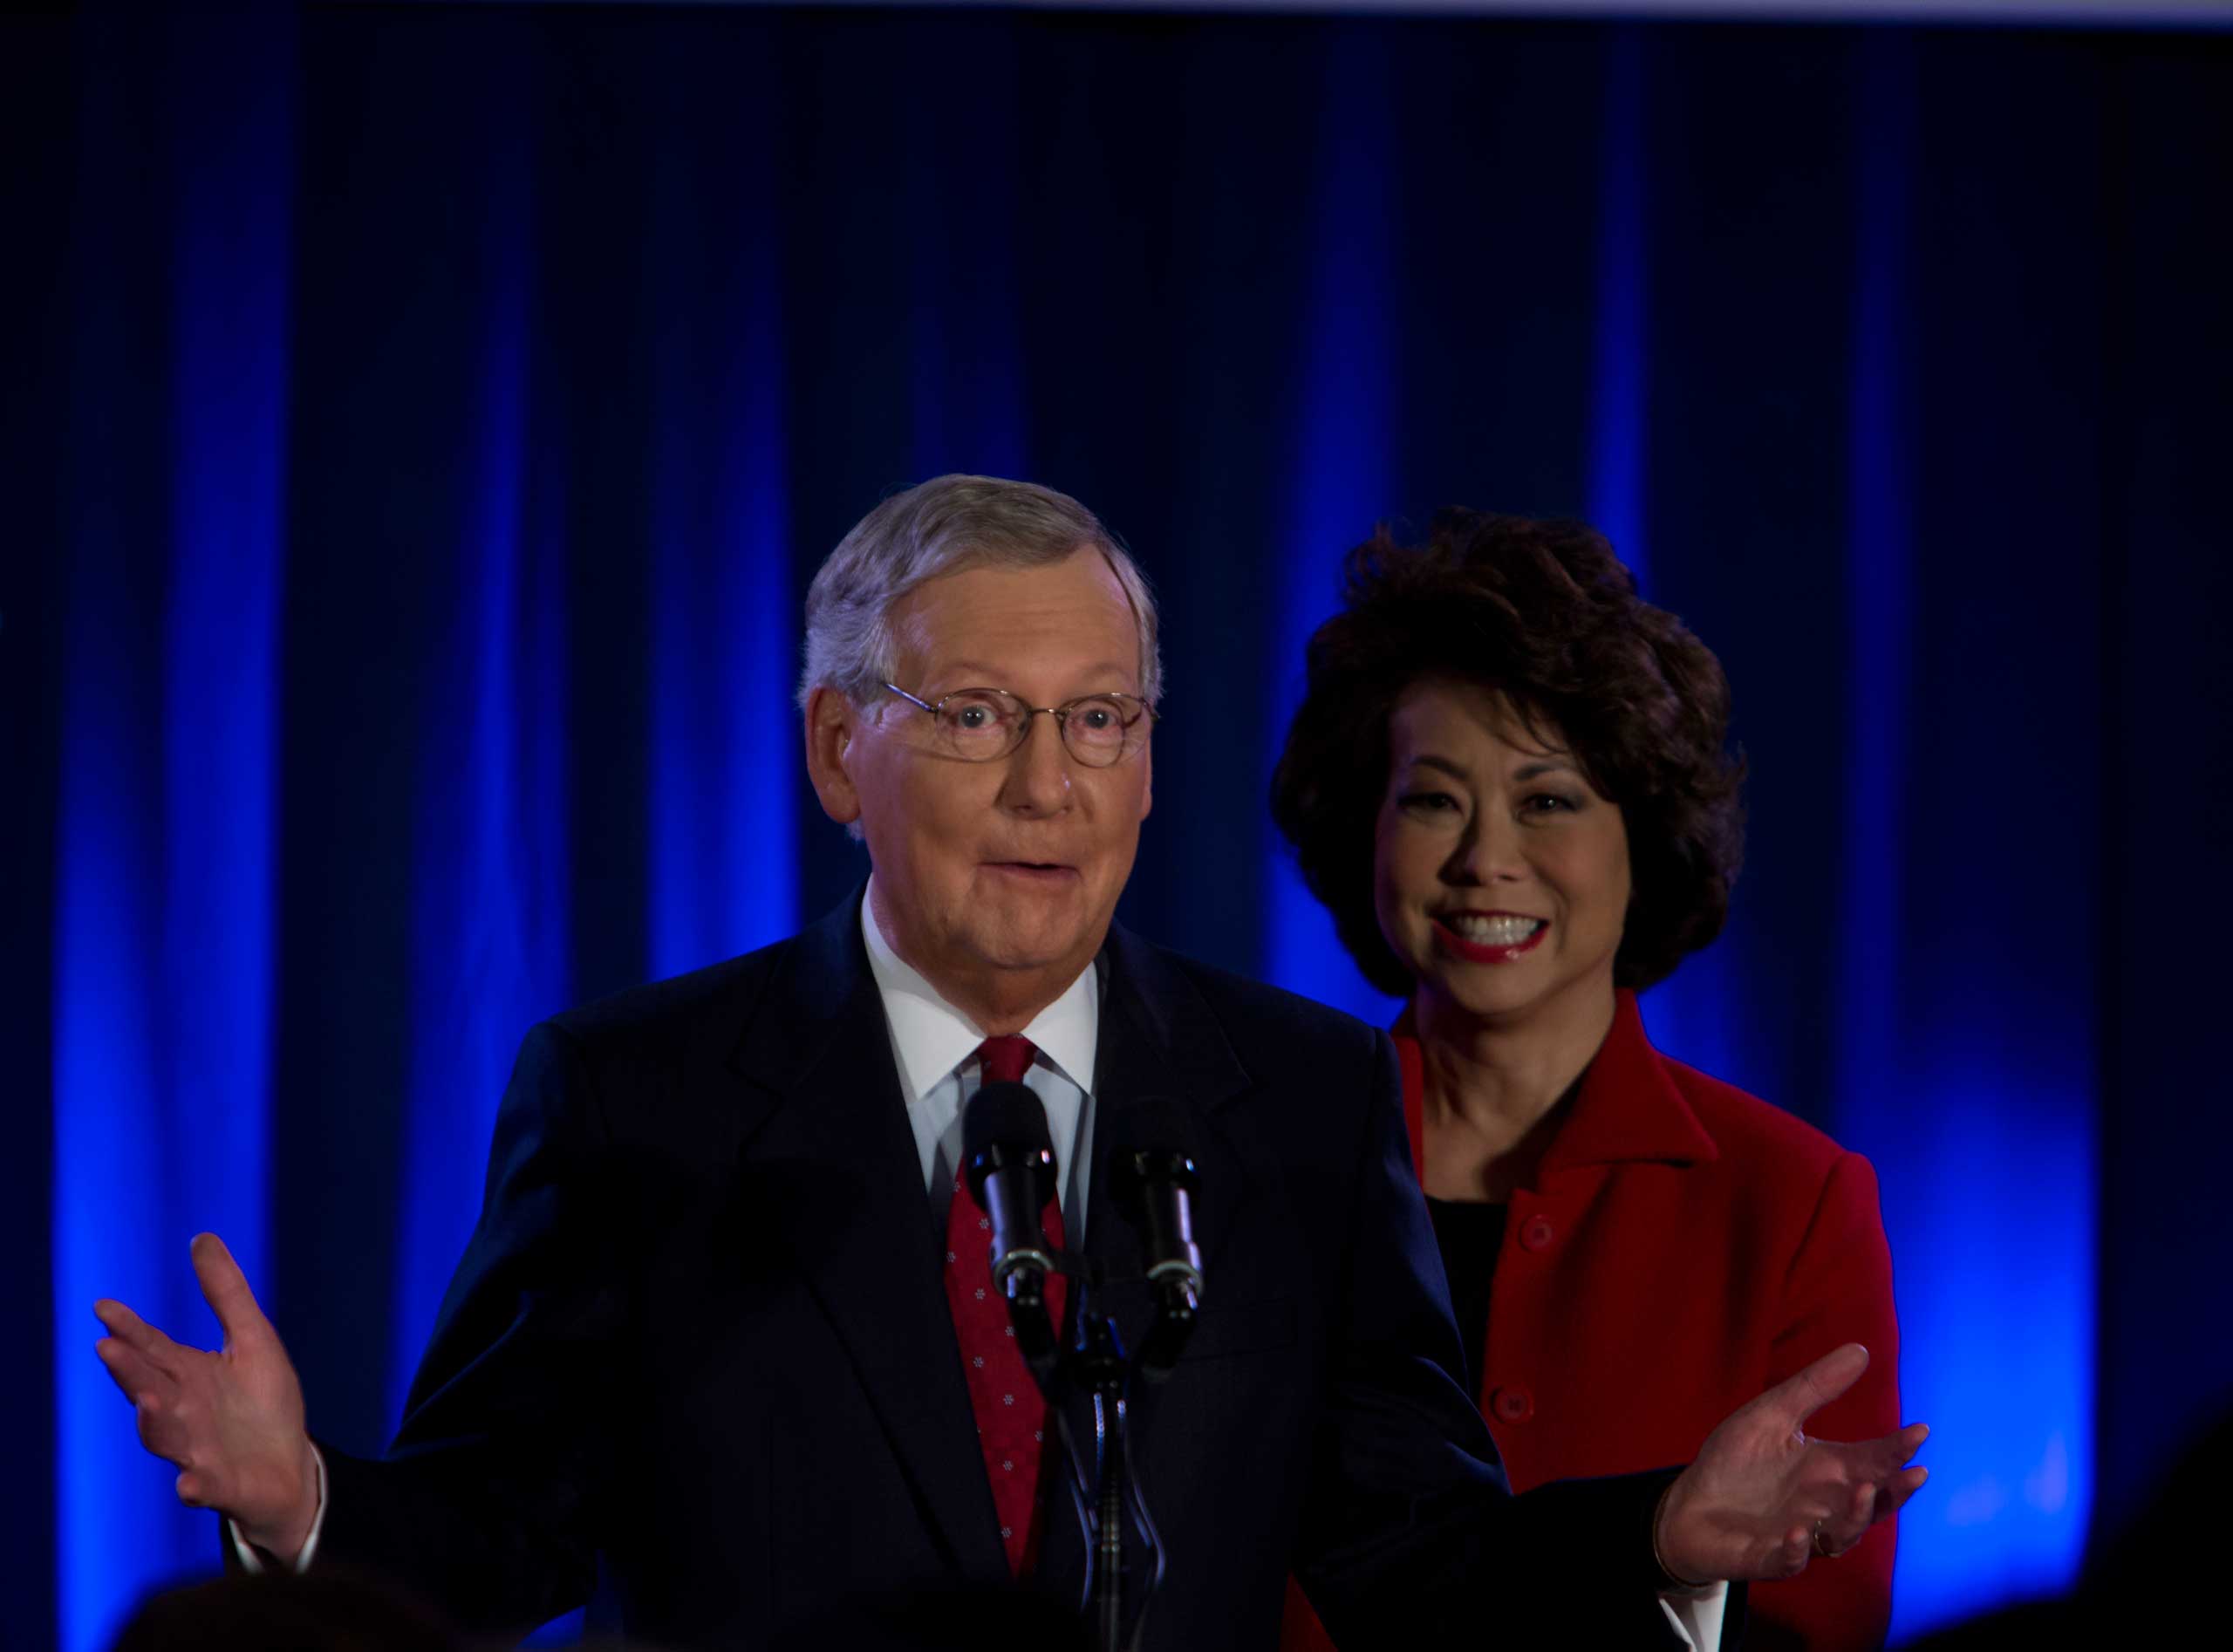 Sen. Mitch McConnell at his election night celebration in Louisville, Ky. on Nov. 4, 2014. (Christopher Morris—VII for TIME)